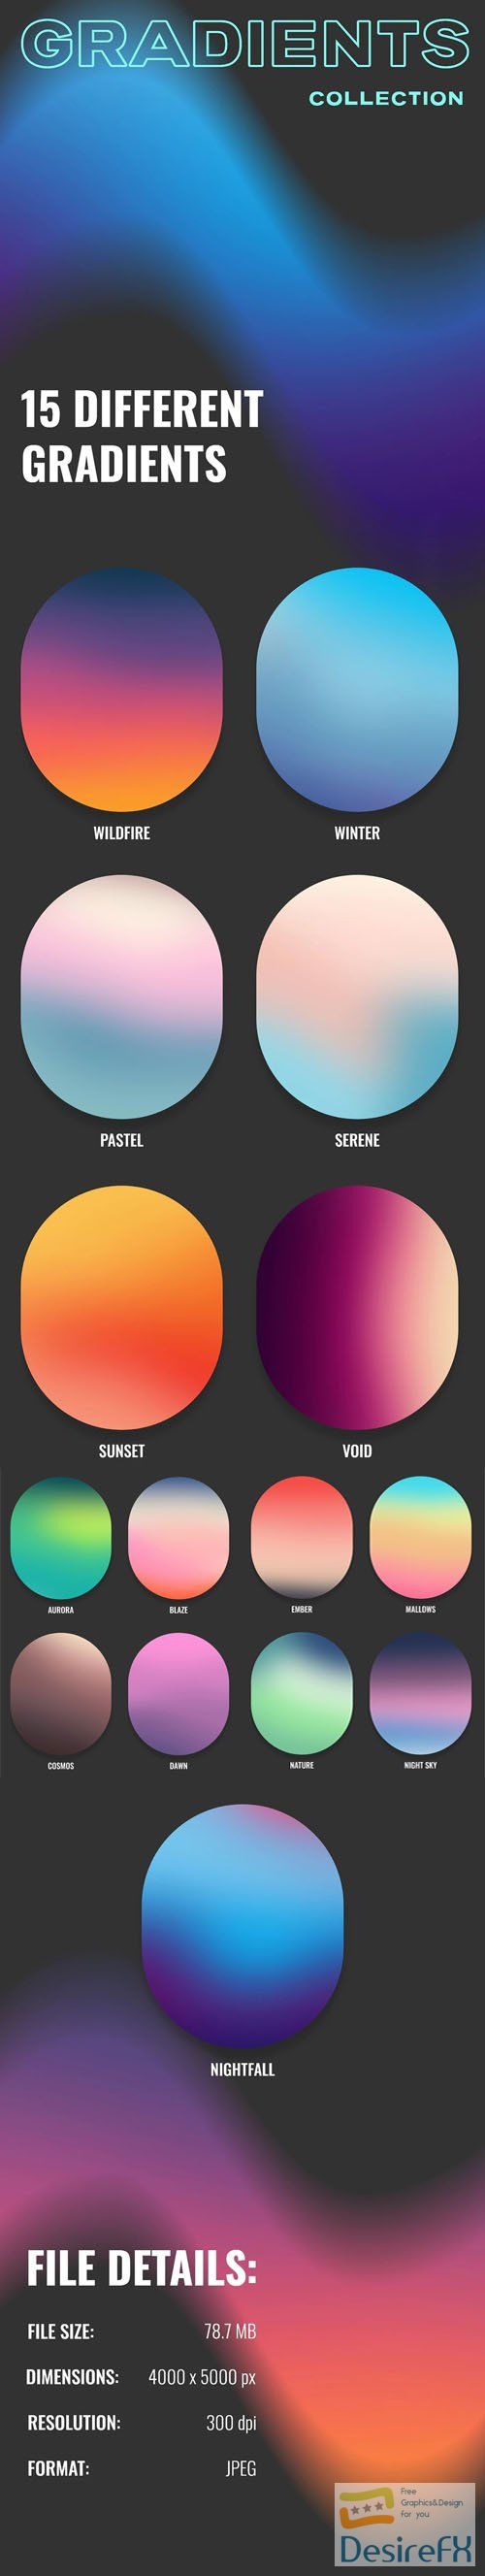 15 Different Gradients Pack